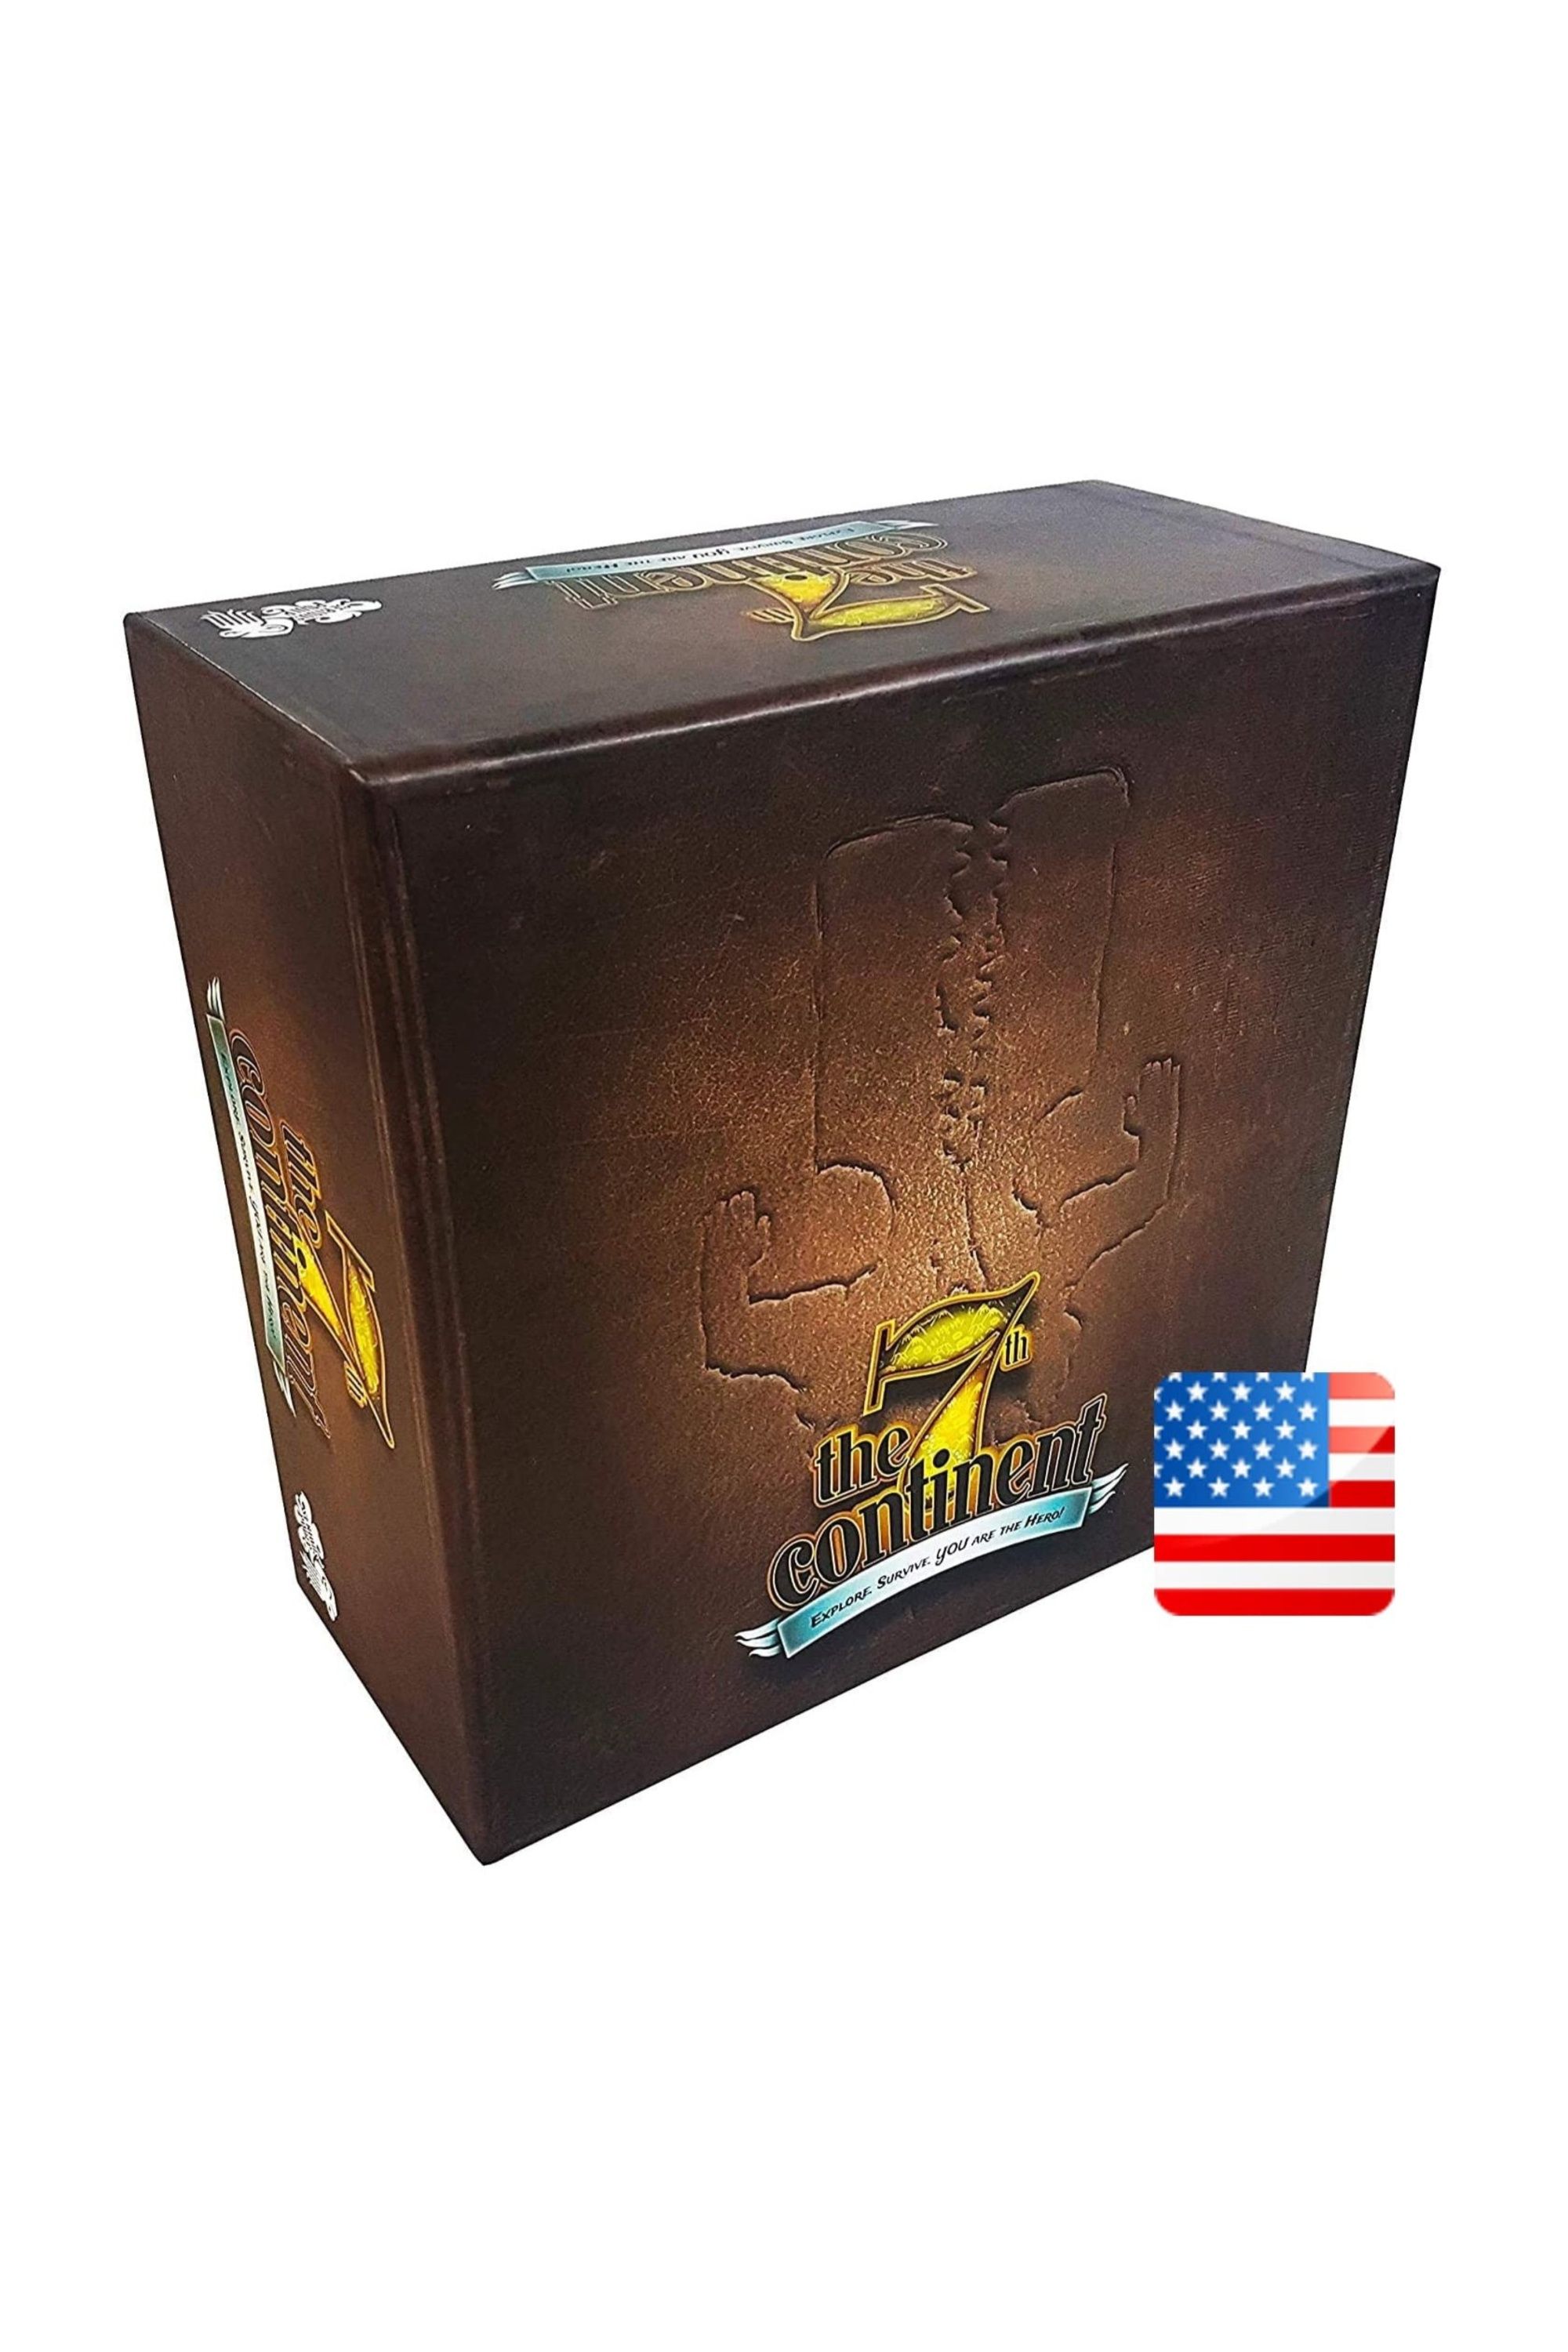 The 7th Continent card game box